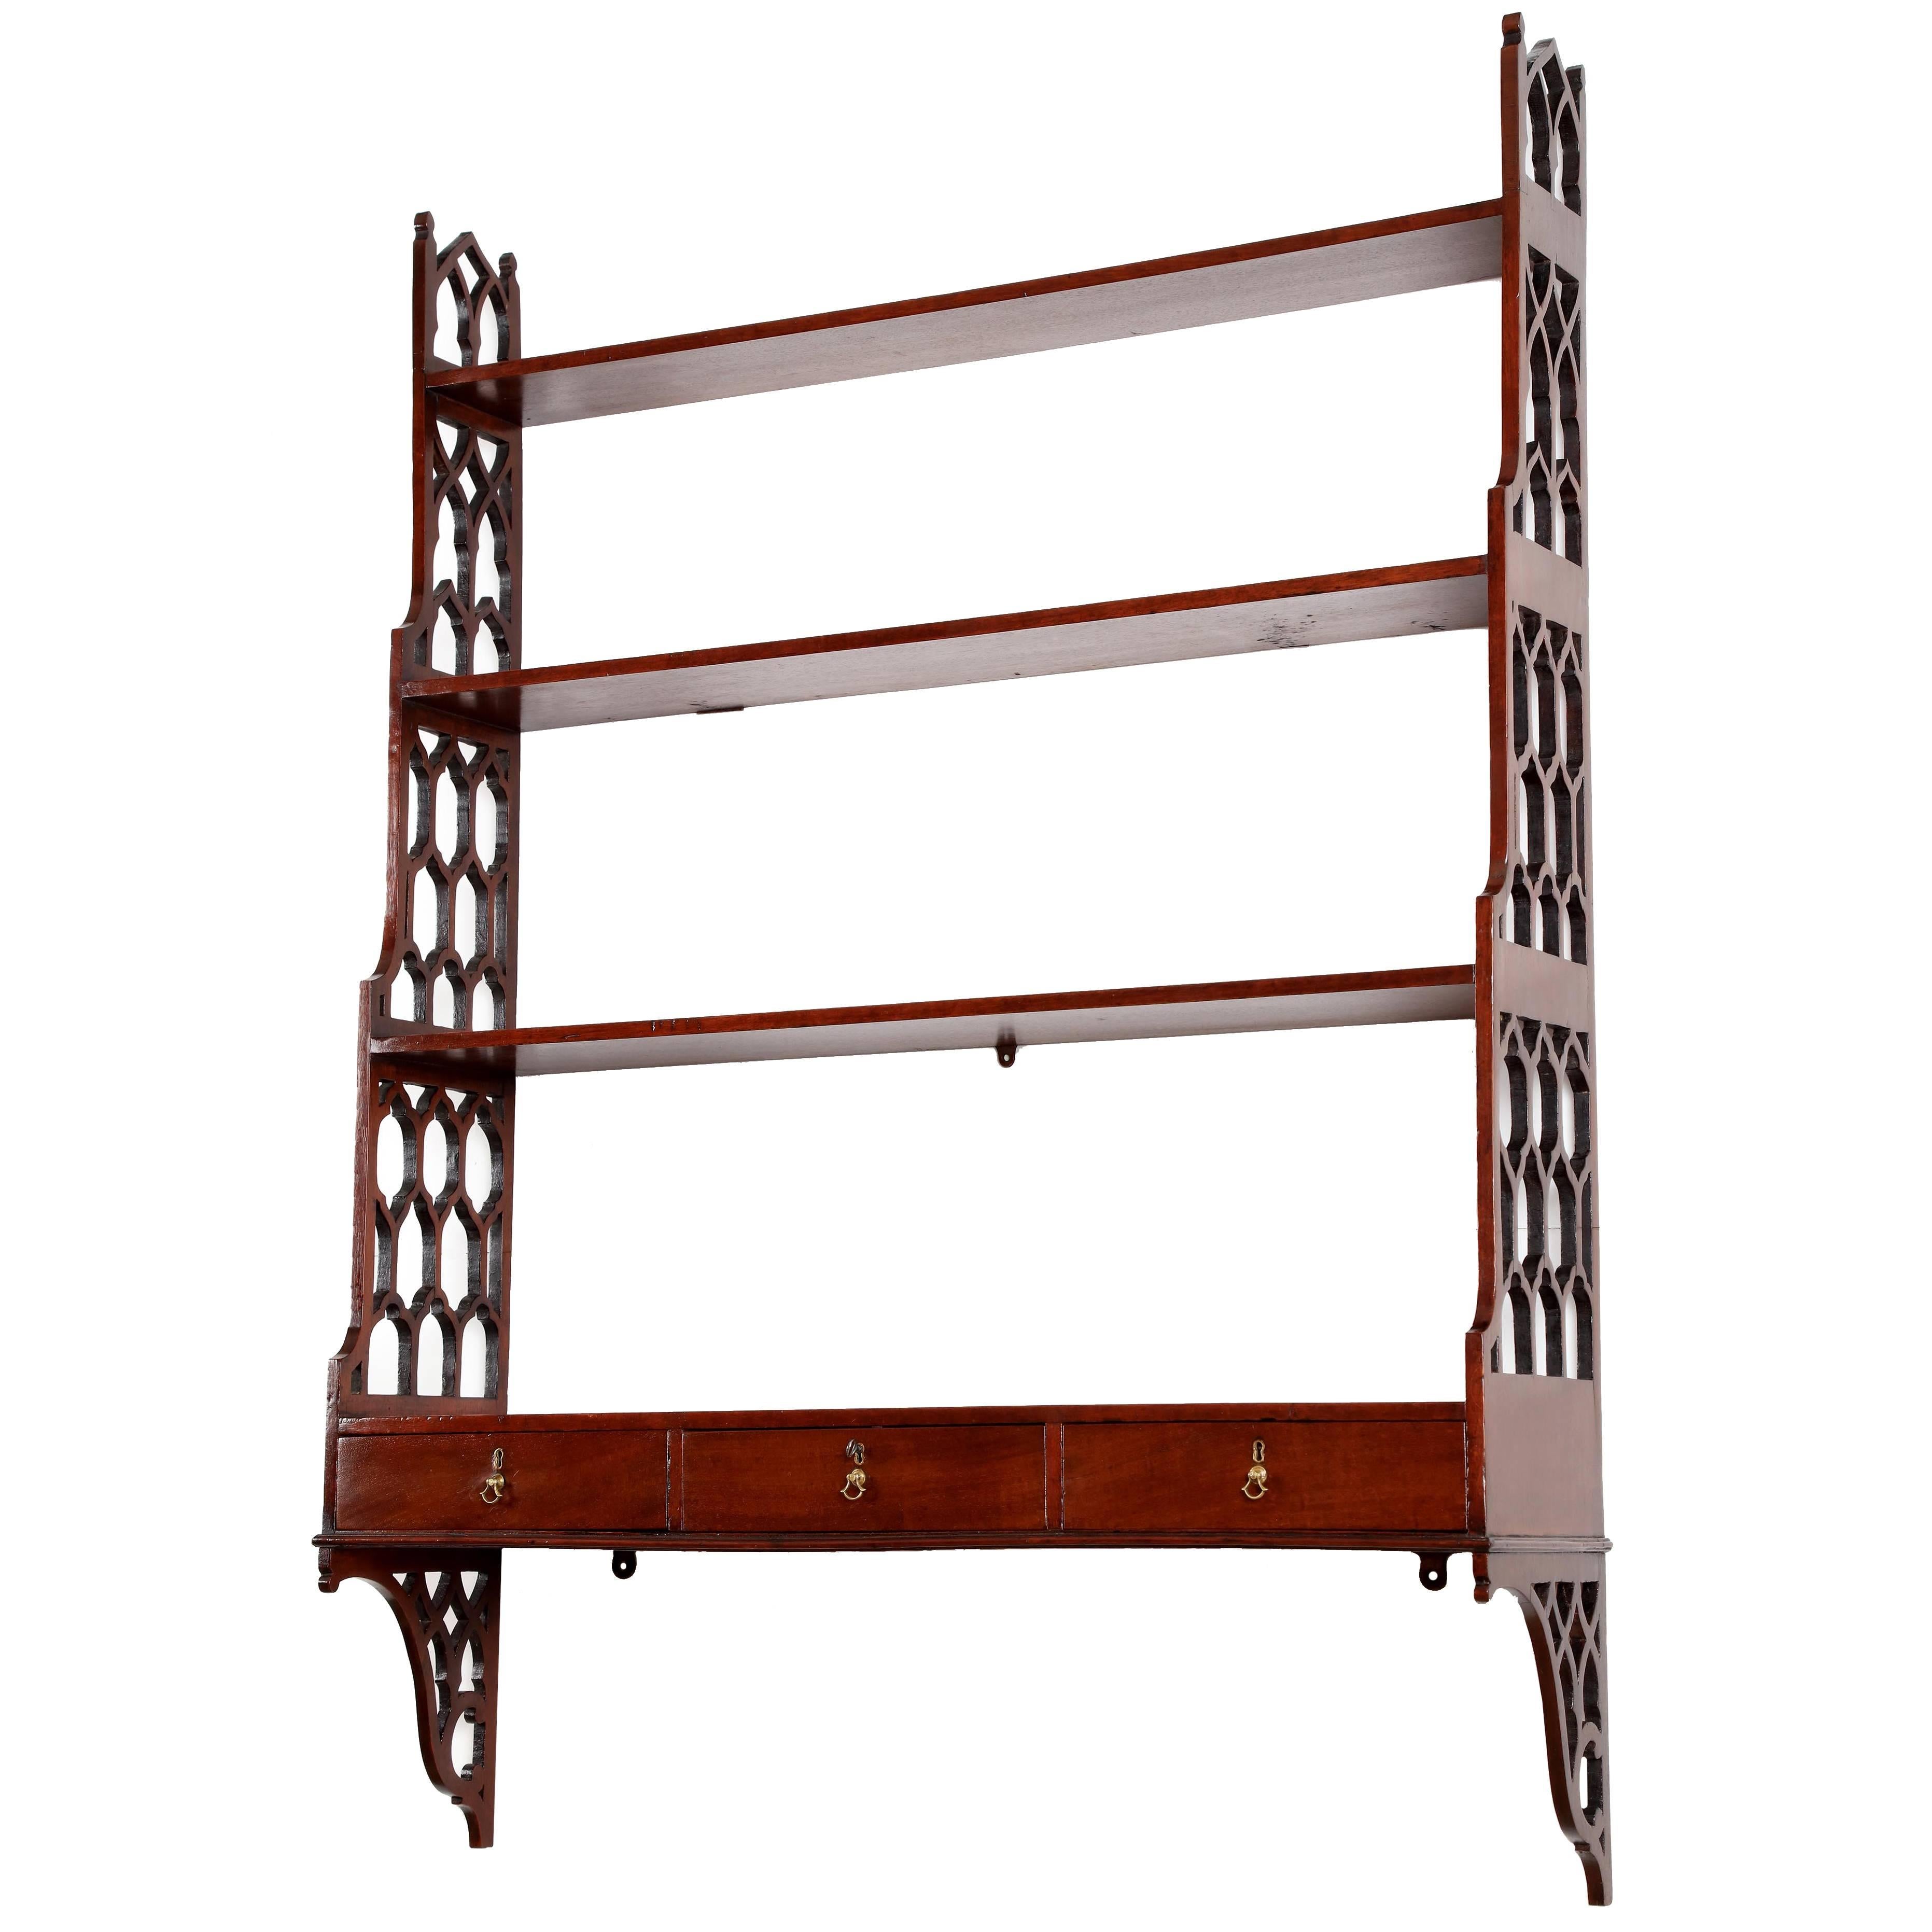 George III Chippendale Period Mahogany Wall Shelves For Sale